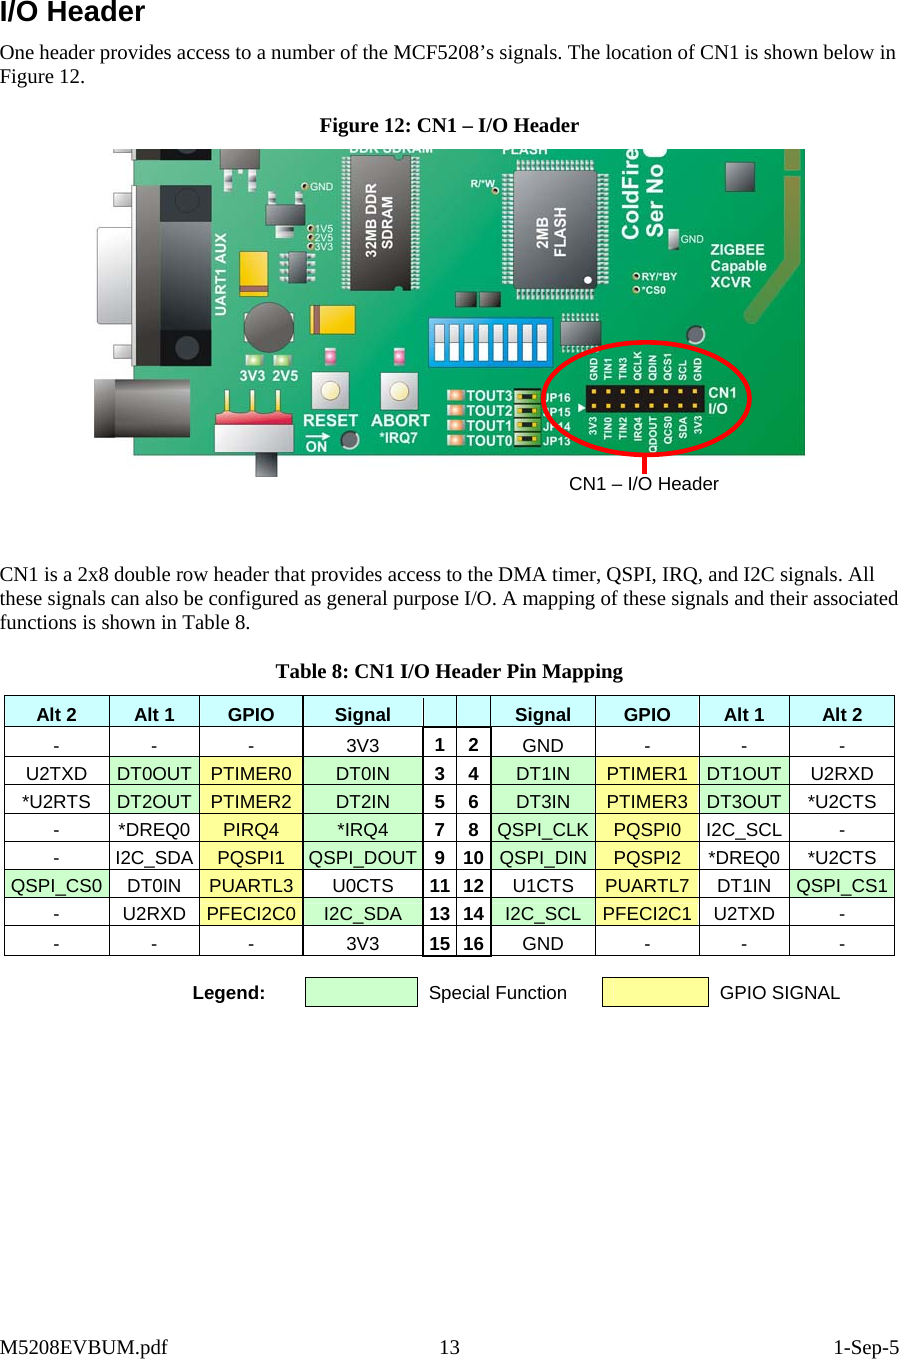   I/O Header One header provides access to a number of the MCF5208’s signals. The location of CN1 is shown below in Figure 12. Figure 12: CN1 – I/O Header    CN1 is a 2x8 double row header that provides access to the DMA timer, QSPI, IRQ, and I2C signals. All these signals can also be configured as general purpose I/O. A mapping of these signals and their associated functions is shown in Table 8.  Table 8: CN1 I/O Header Pin Mapping Alt 2  Alt 1  GPIO  Signal        Signal  GPIO  Alt 1  Alt 2 - - - 3V3 1 2  GND -  -  - U2TXD  DT0OUT  PTIMER0  DT0IN  3 4  DT1IN  PTIMER1  DT1OUT  U2RXD *U2RTS  DT2OUT  PTIMER2  DT2IN  5 6  DT3IN  PTIMER3  DT3OUT  *U2CTS - *DREQ0 PIRQ4  *IRQ4  7 8 QSPI_CLK PQSPI0  I2C_SCL - - I2C_SDA PQSPI1  QSPI_DOUT 9 10 QSPI_DIN PQSPI2  *DREQ0 *U2CTS QSPI_CS0  DT0IN  PUARTL3  U0CTS  11 12 U1CTS  PUARTL7 DT1IN  QSPI_CS1- U2RXD PFECI2C0  I2C_SDA  13 14 I2C_SCL  PFECI2C1 U2TXD - - - - 3V3 15 16 GND -  -  - Legend:  Special Function   GPIO SIGNAL CN1 – I/O Header    M5208EVBUM.pdf 13  1-Sep-5 